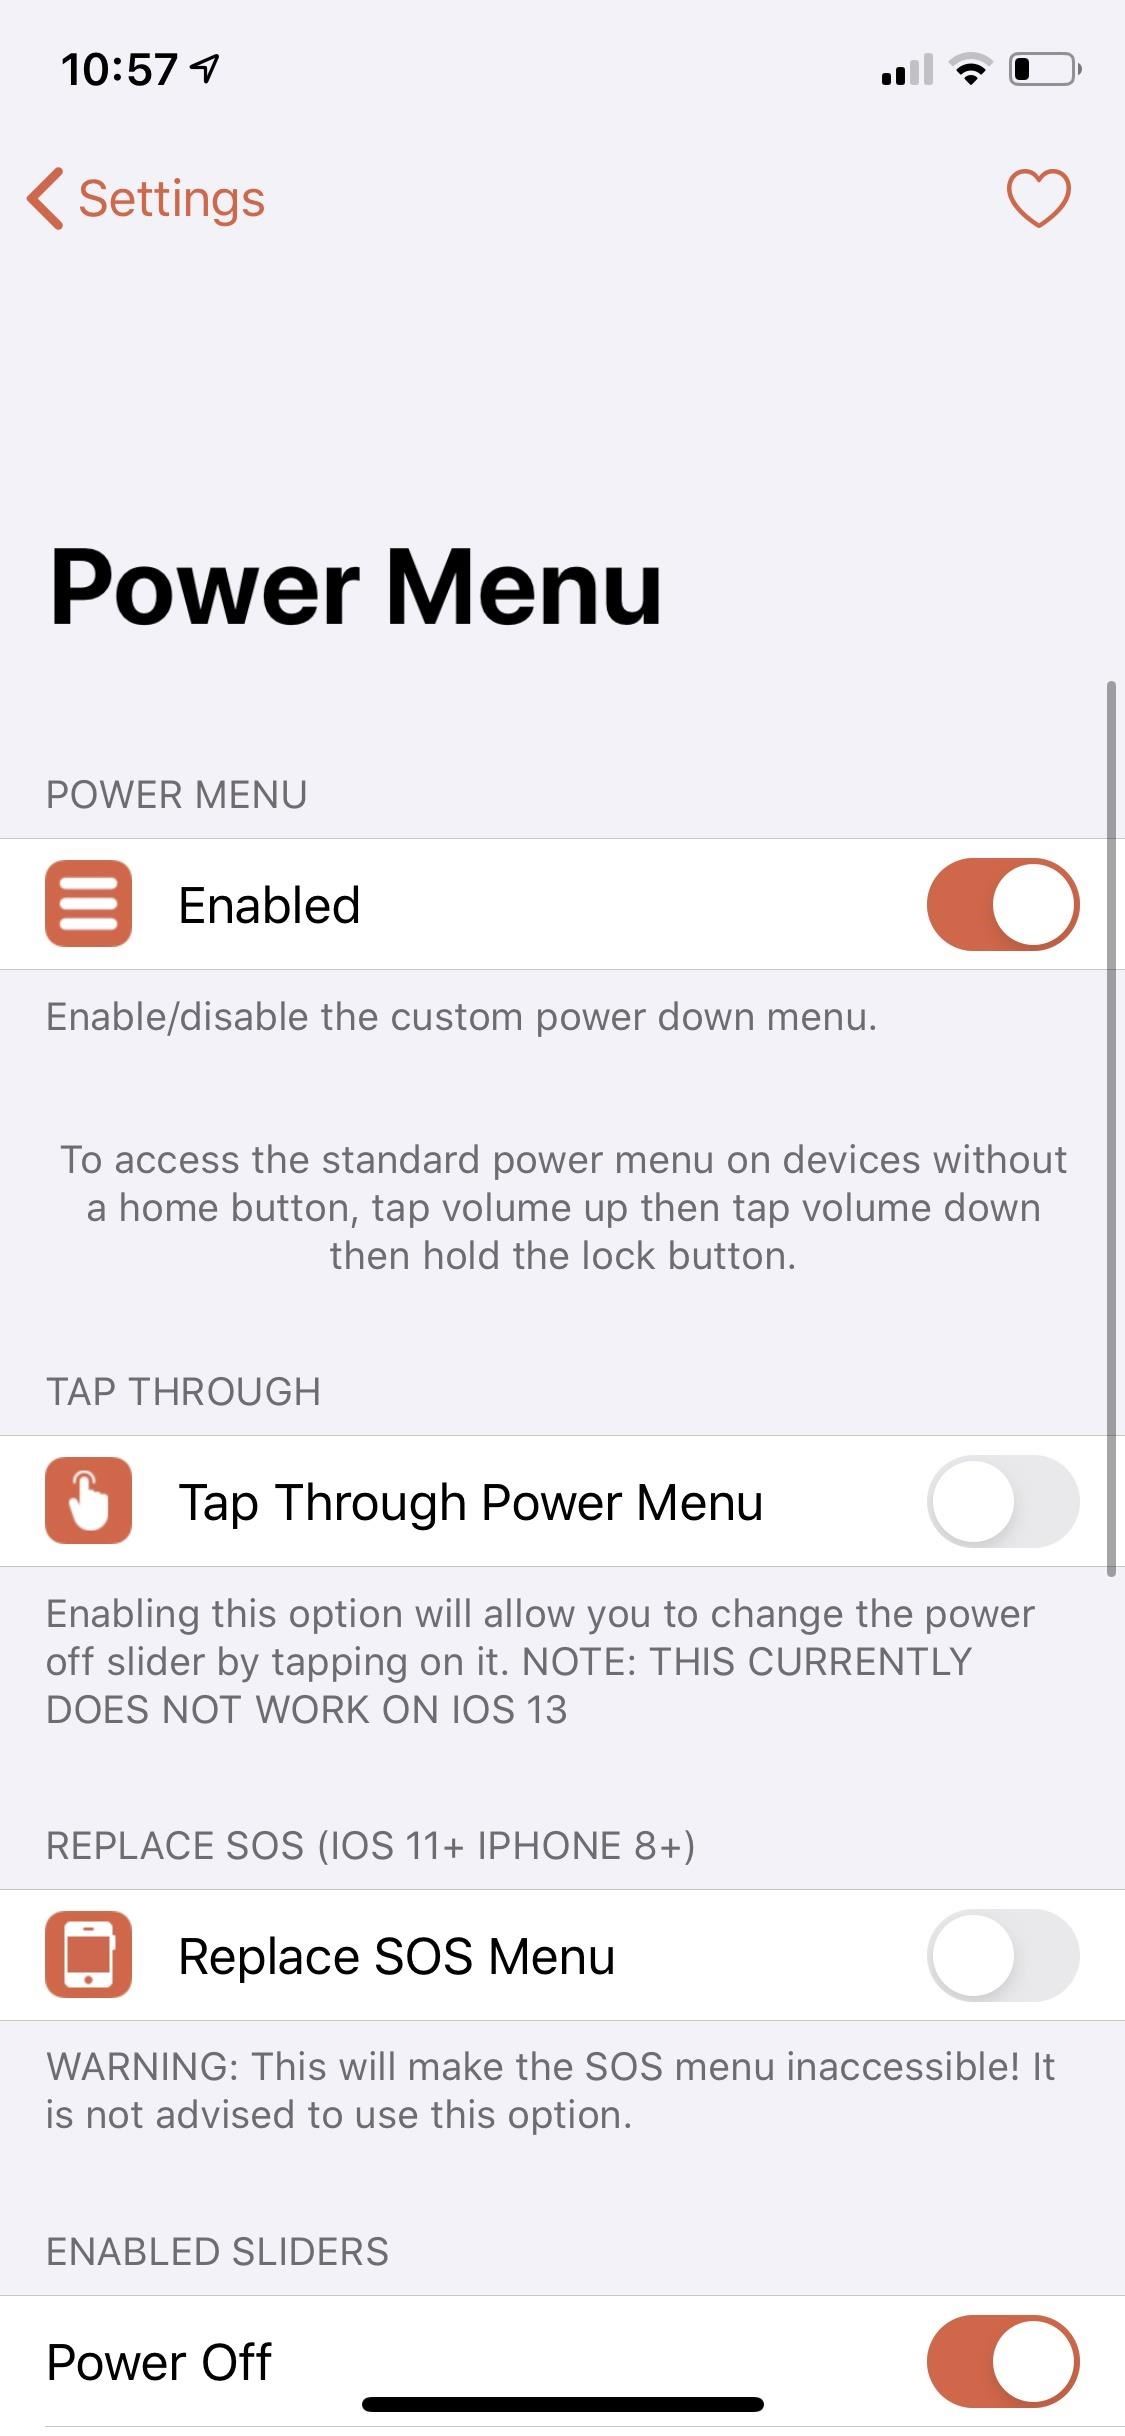 This Tweak Puts Your iPhone in Hibernation Mode to Save Tons of Battery